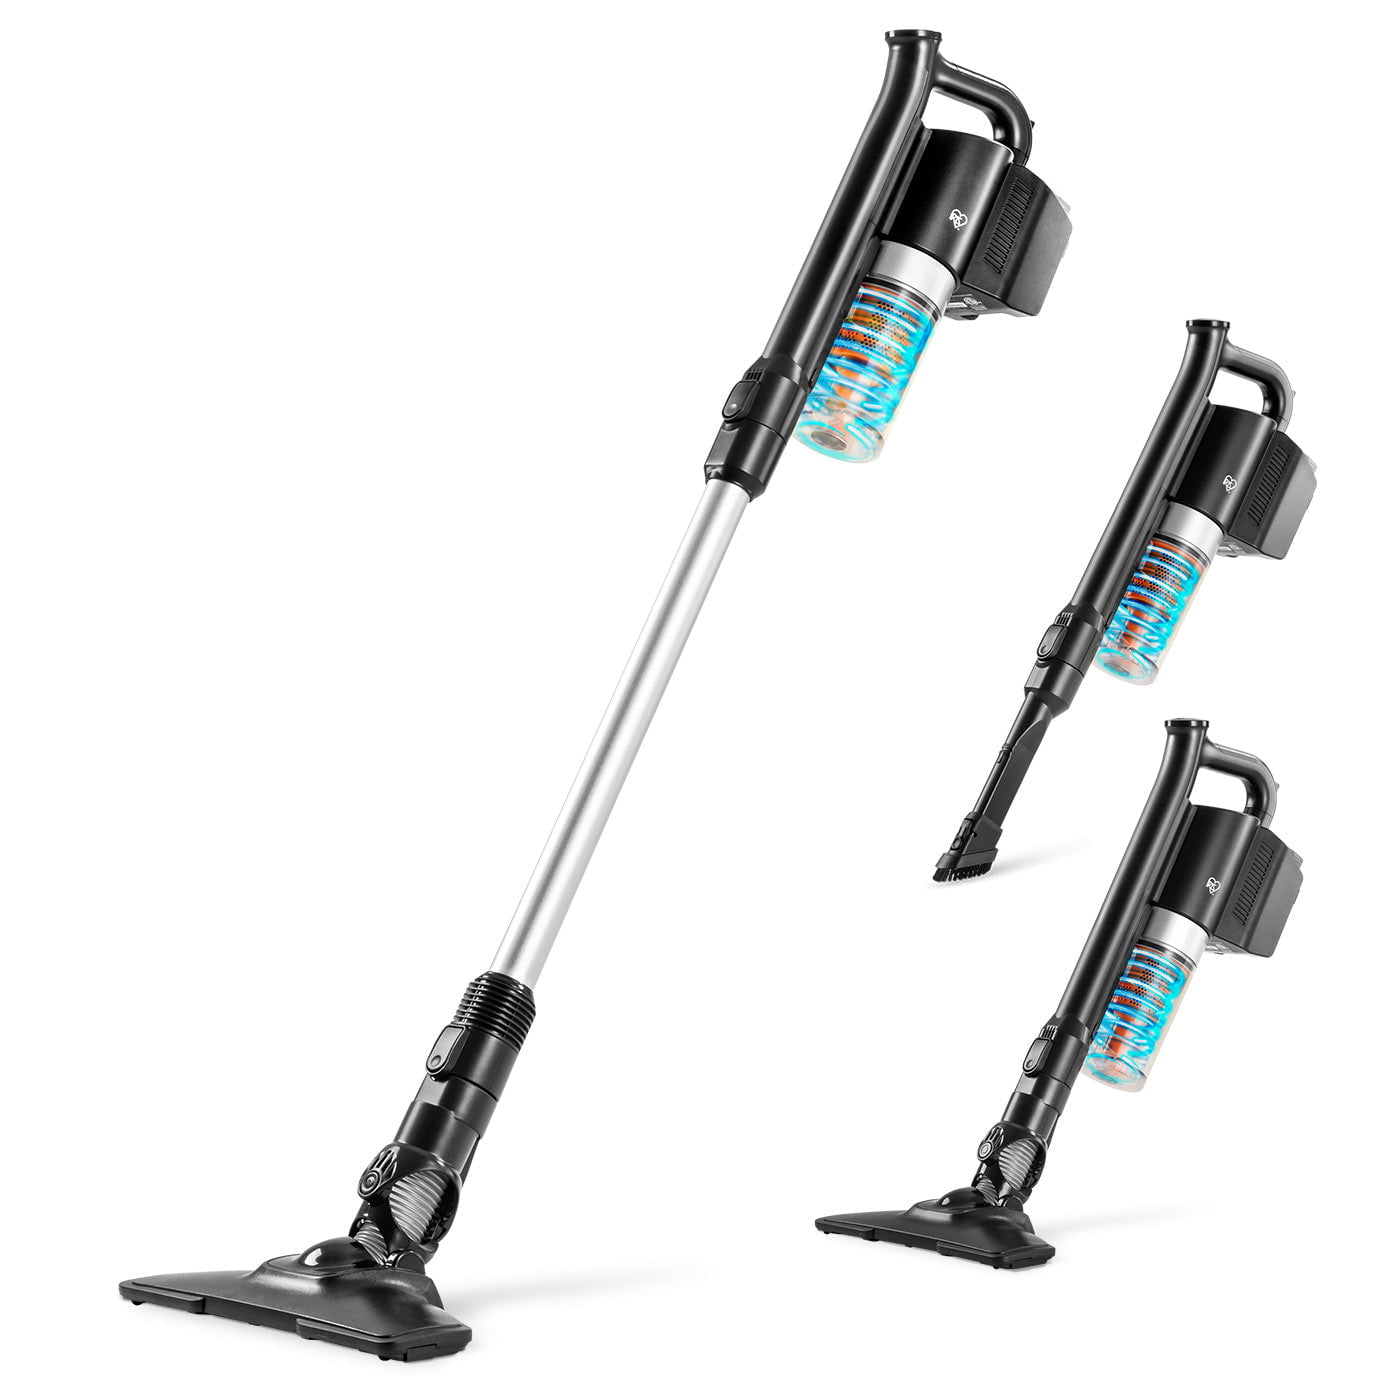 IRIS USA High Power Cordless Stick Vacuum Cleaner with Replaceable Rechargeable  Battery, 1 unit - Kroger